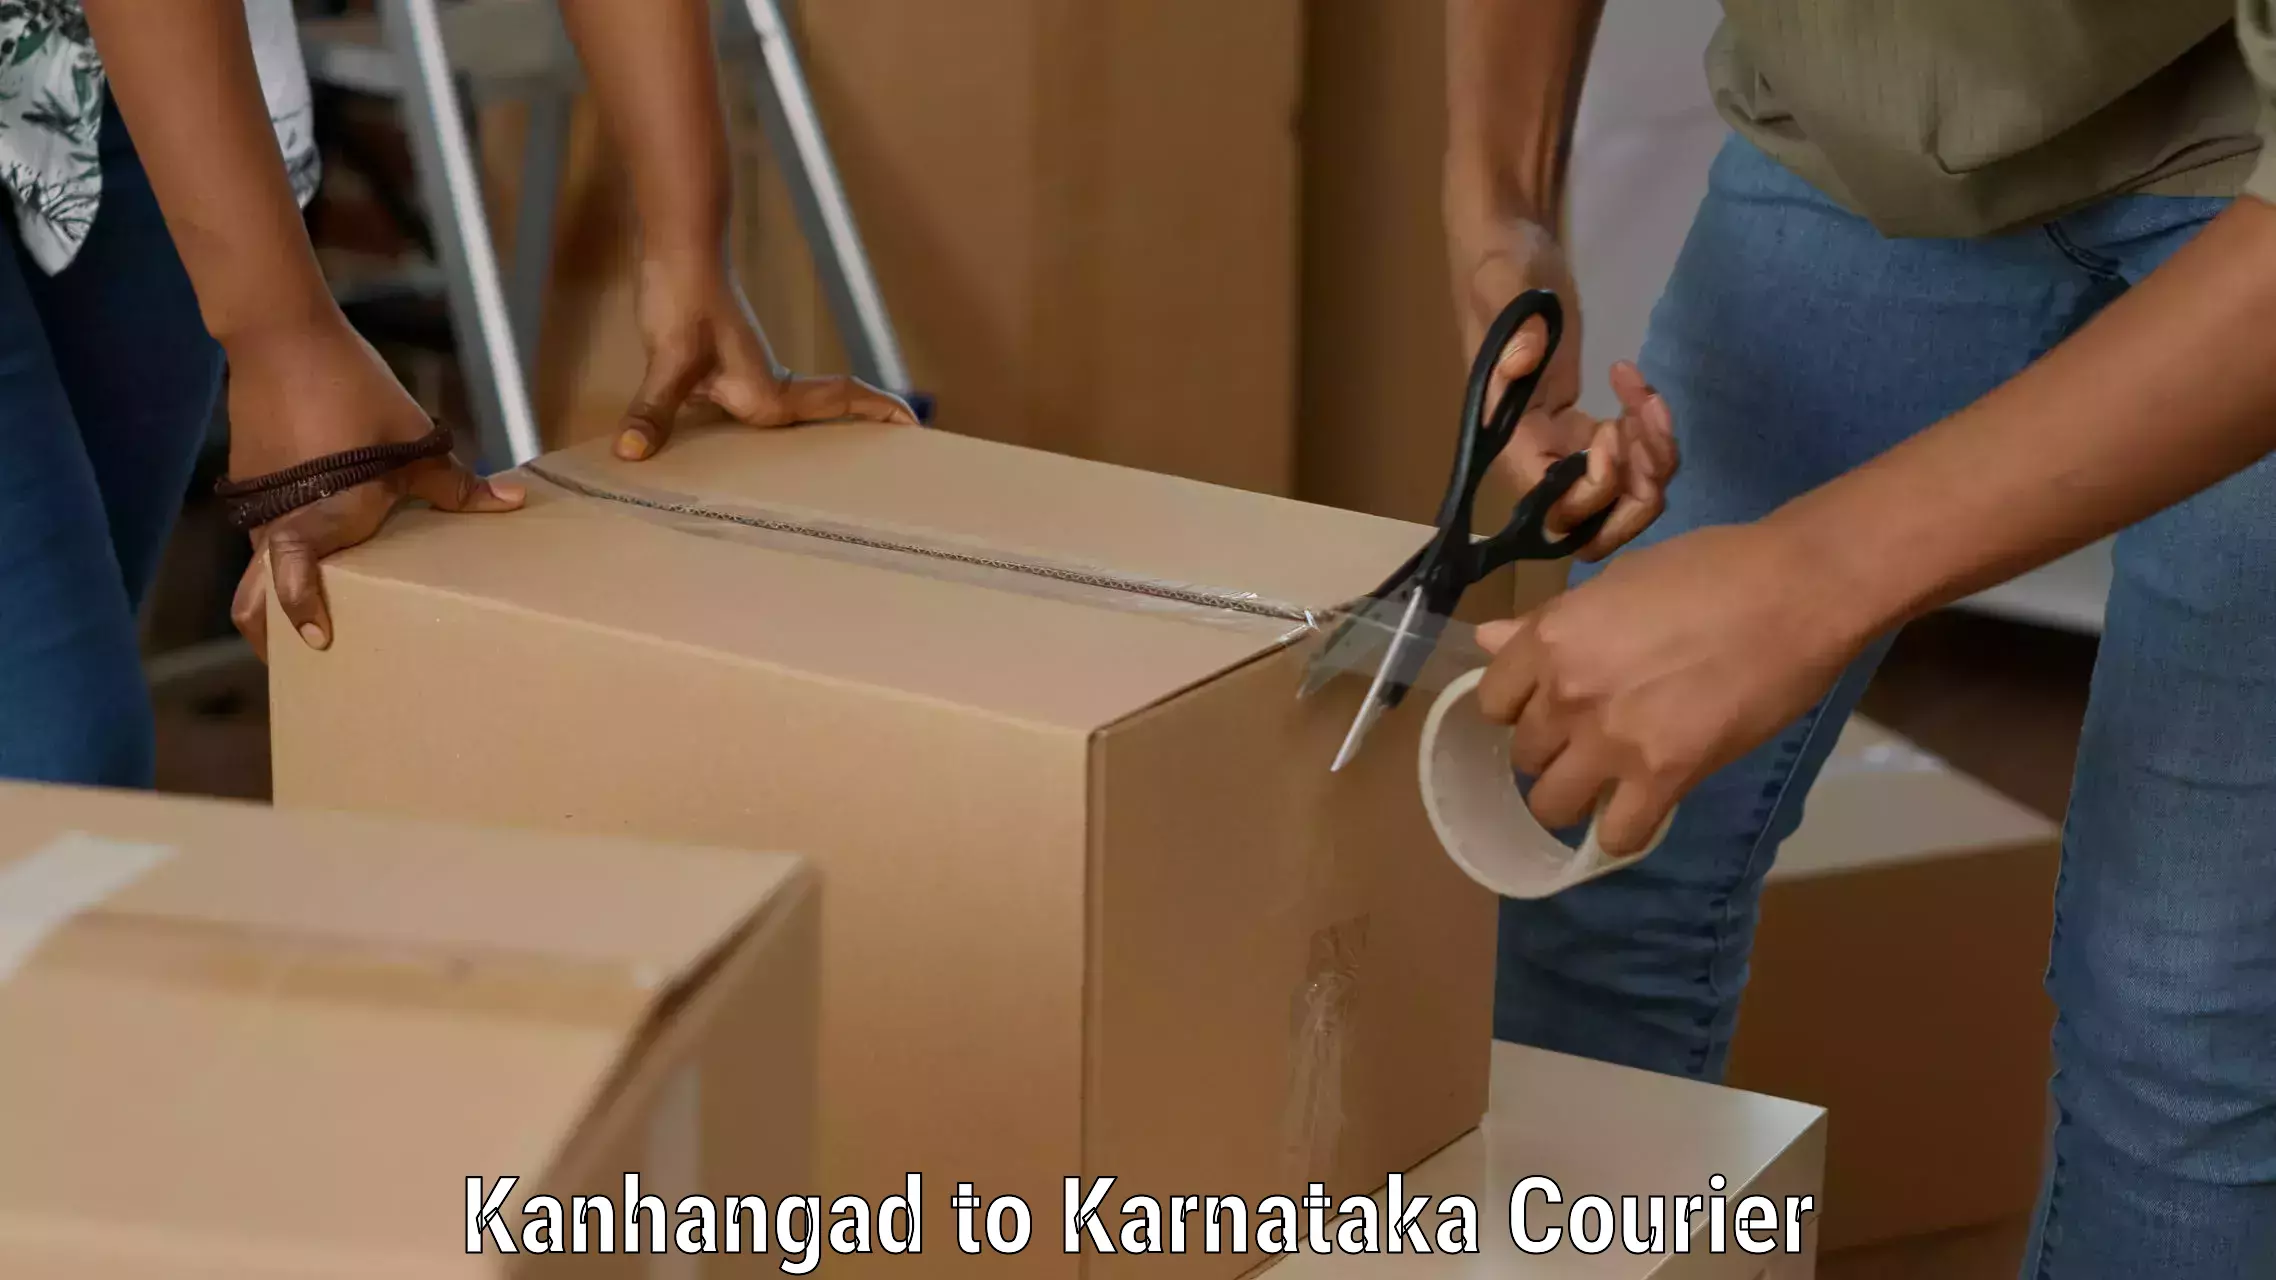 Reliable courier service Kanhangad to Mangalore Port